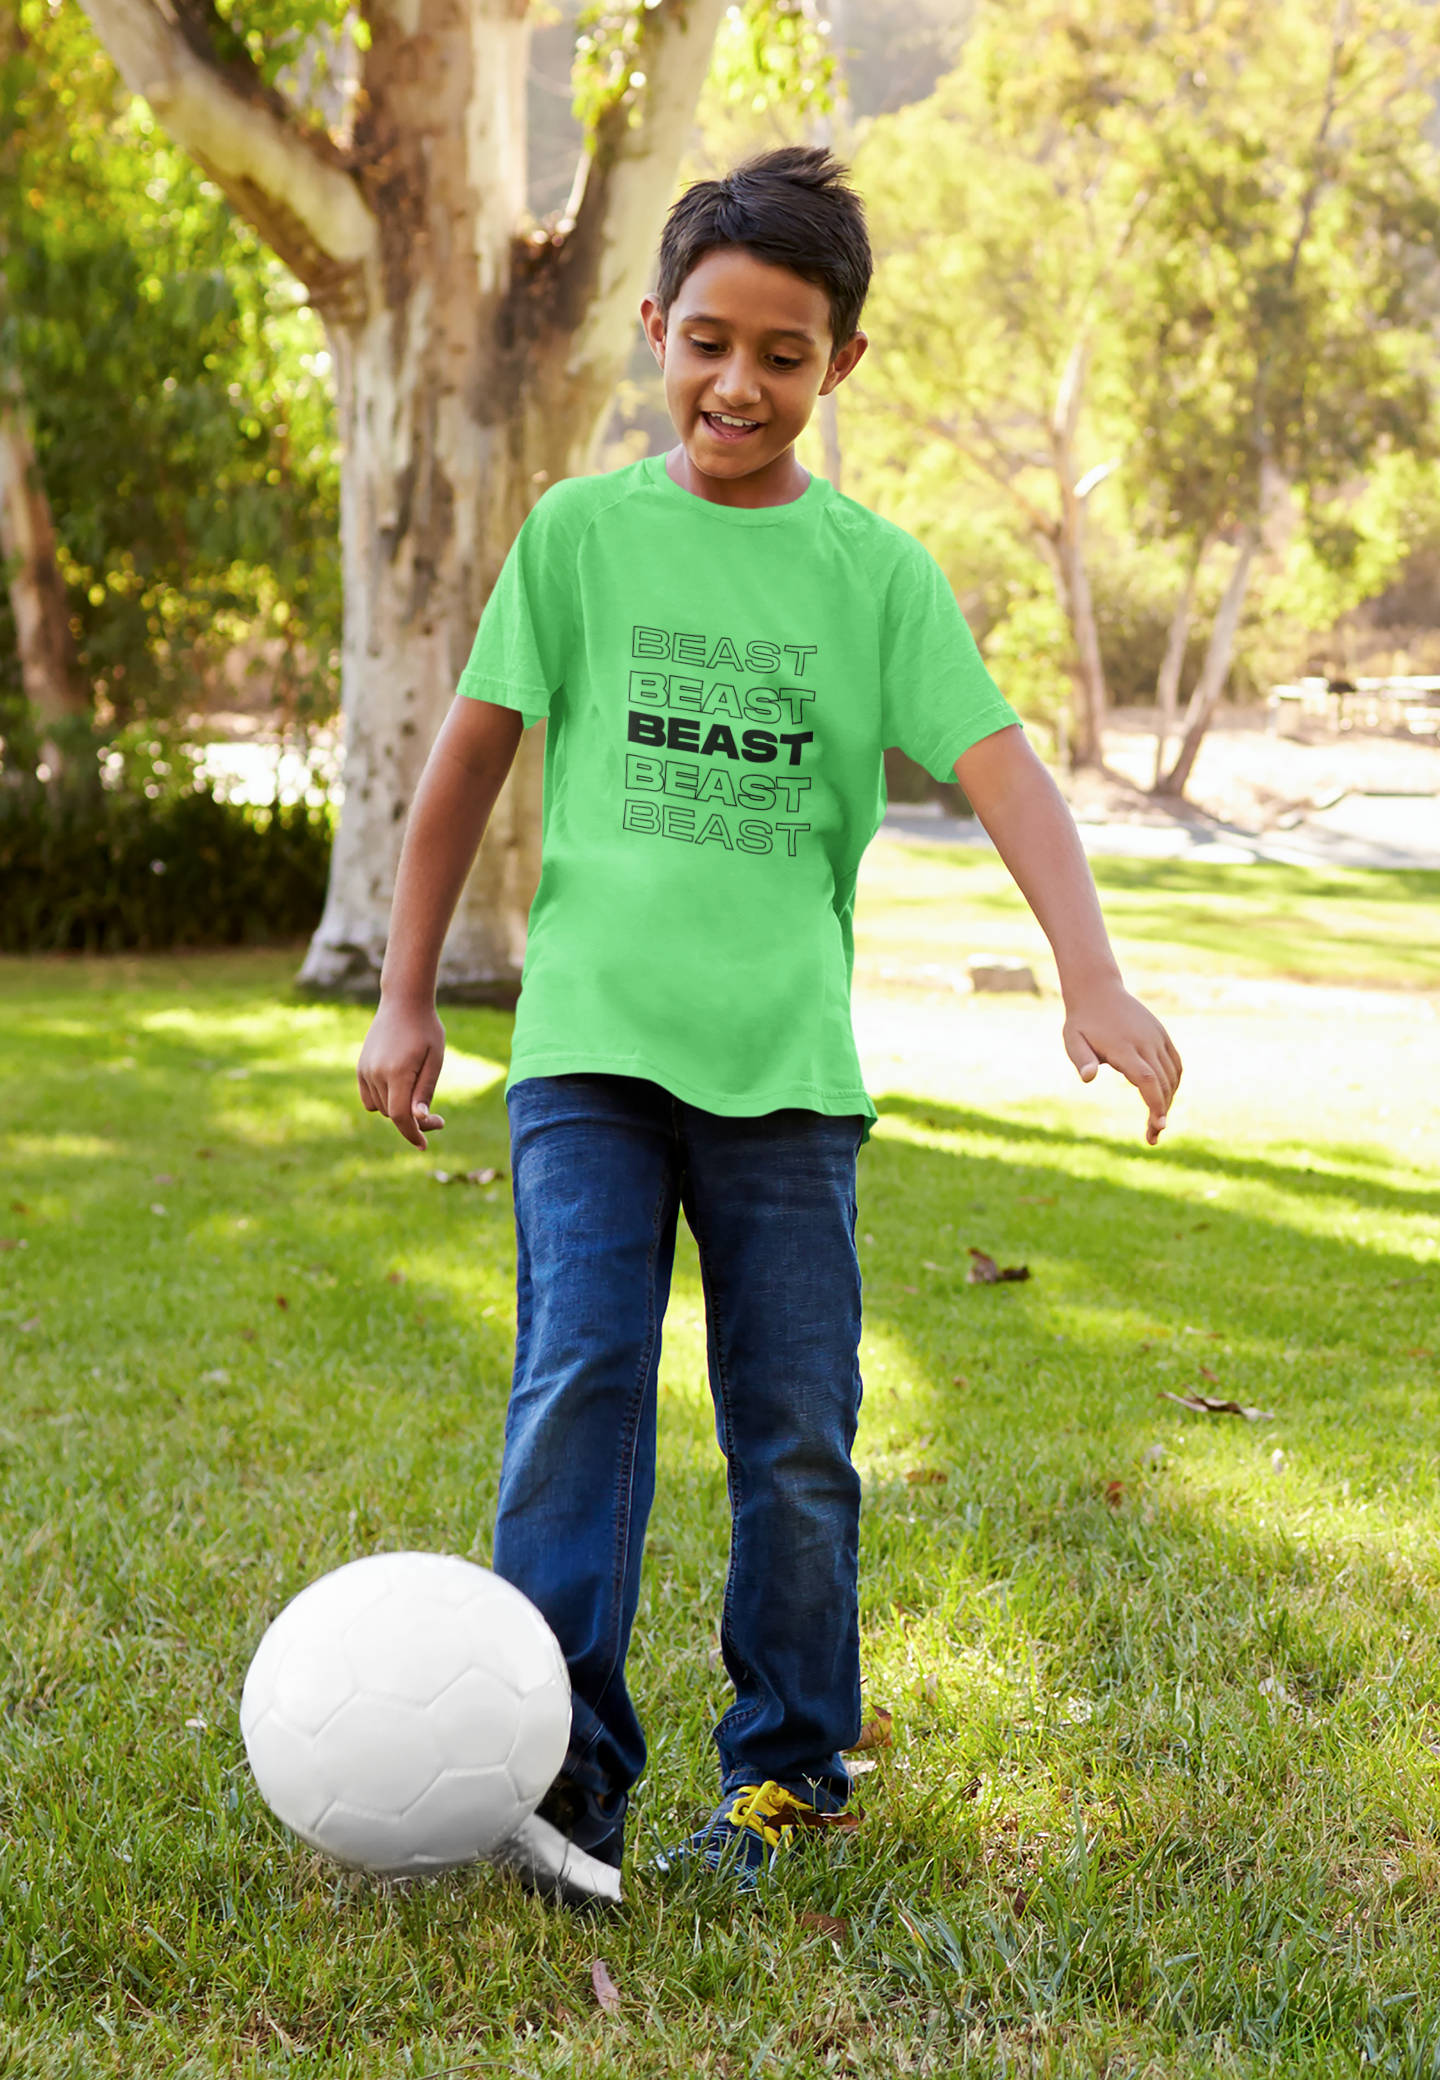 raglan-tee-mockup-featuring-a-kid-playing-with-a-soccer-ball-39392-r-el2.png